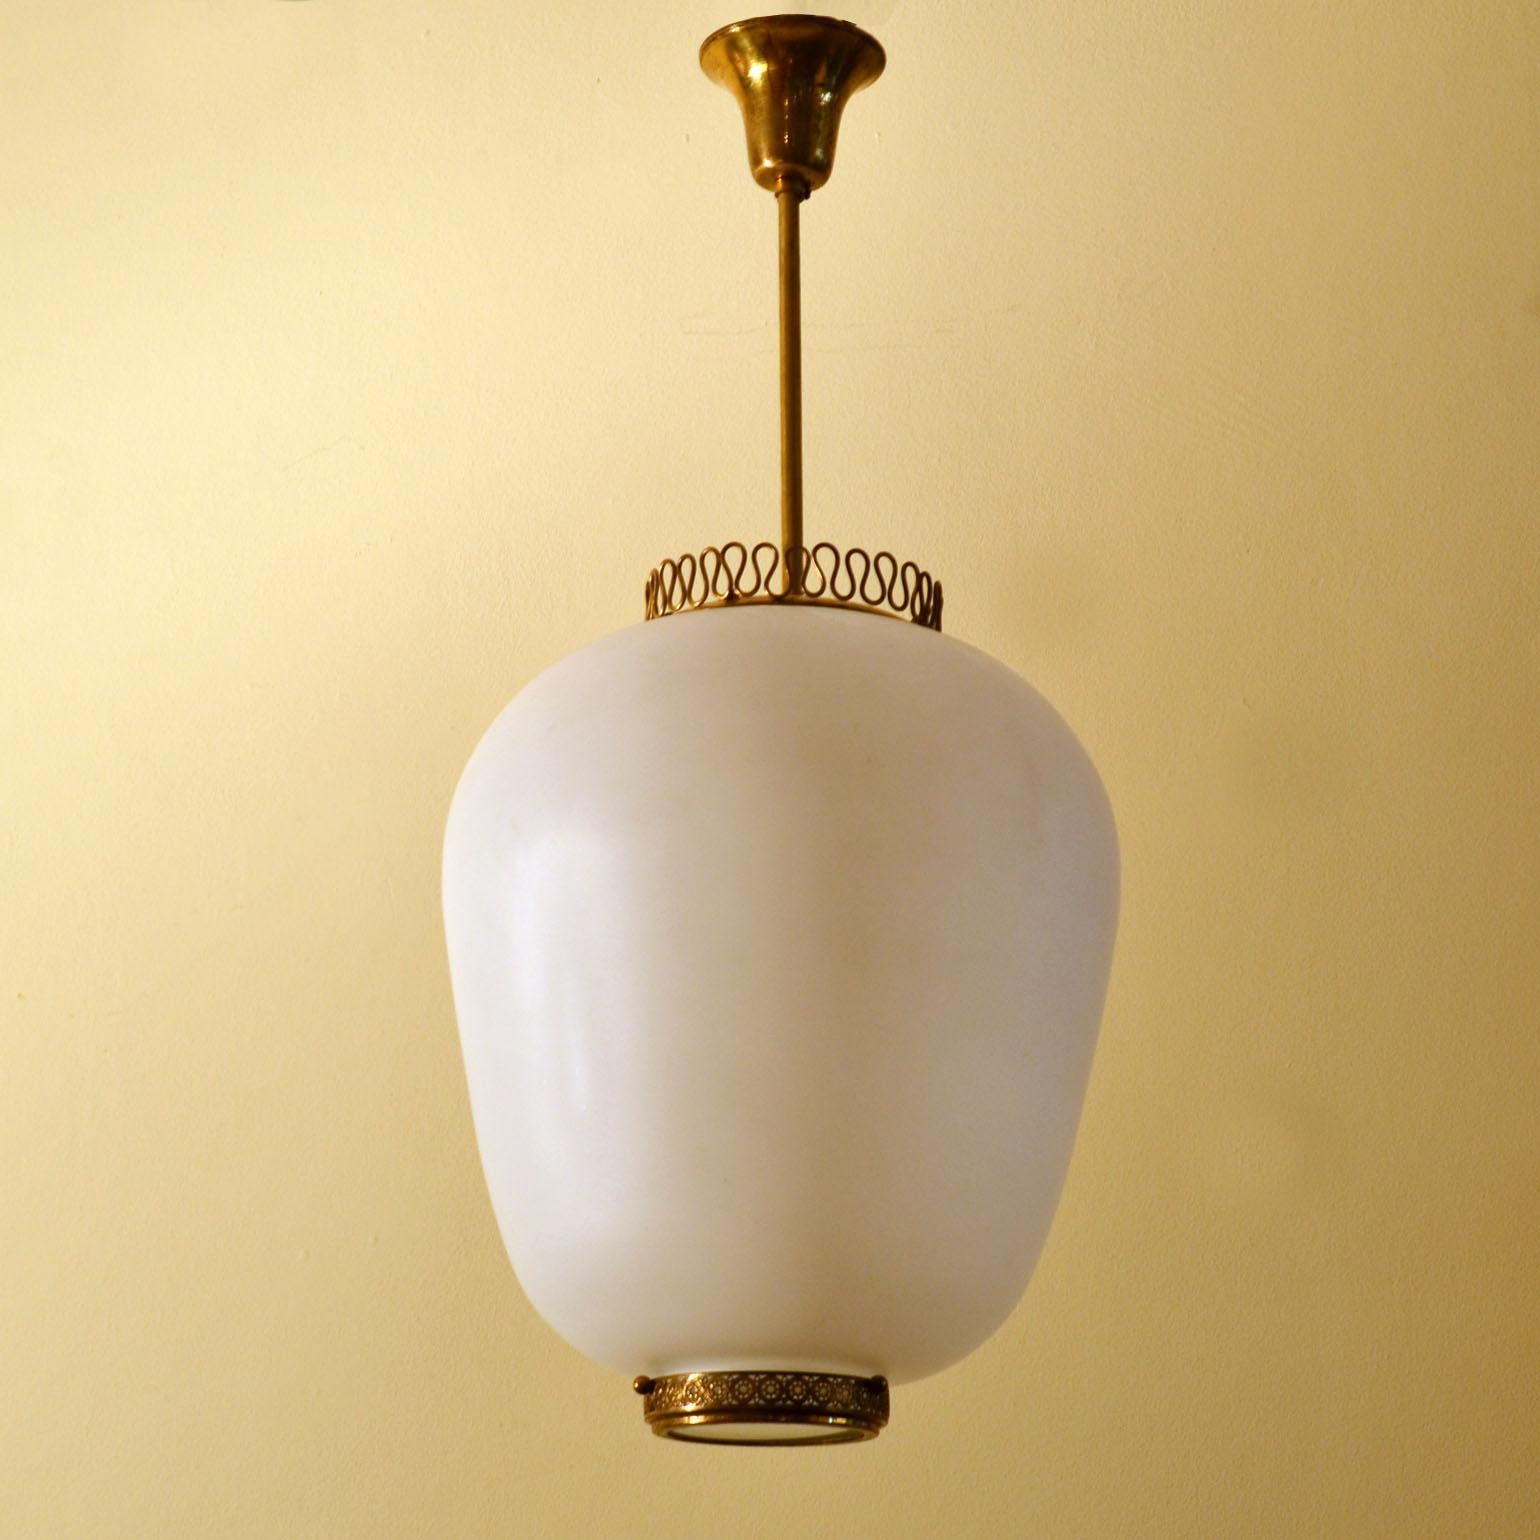 Original hand blown diffuser shade pendant lamp on brass stem by Stilnovo, 1950s, Italy. Elegant pendant lamp with large milk glass hand blown shade has a brass crown and diamond cut  glass diffuser underneath that is set in a brass frame. The lamp